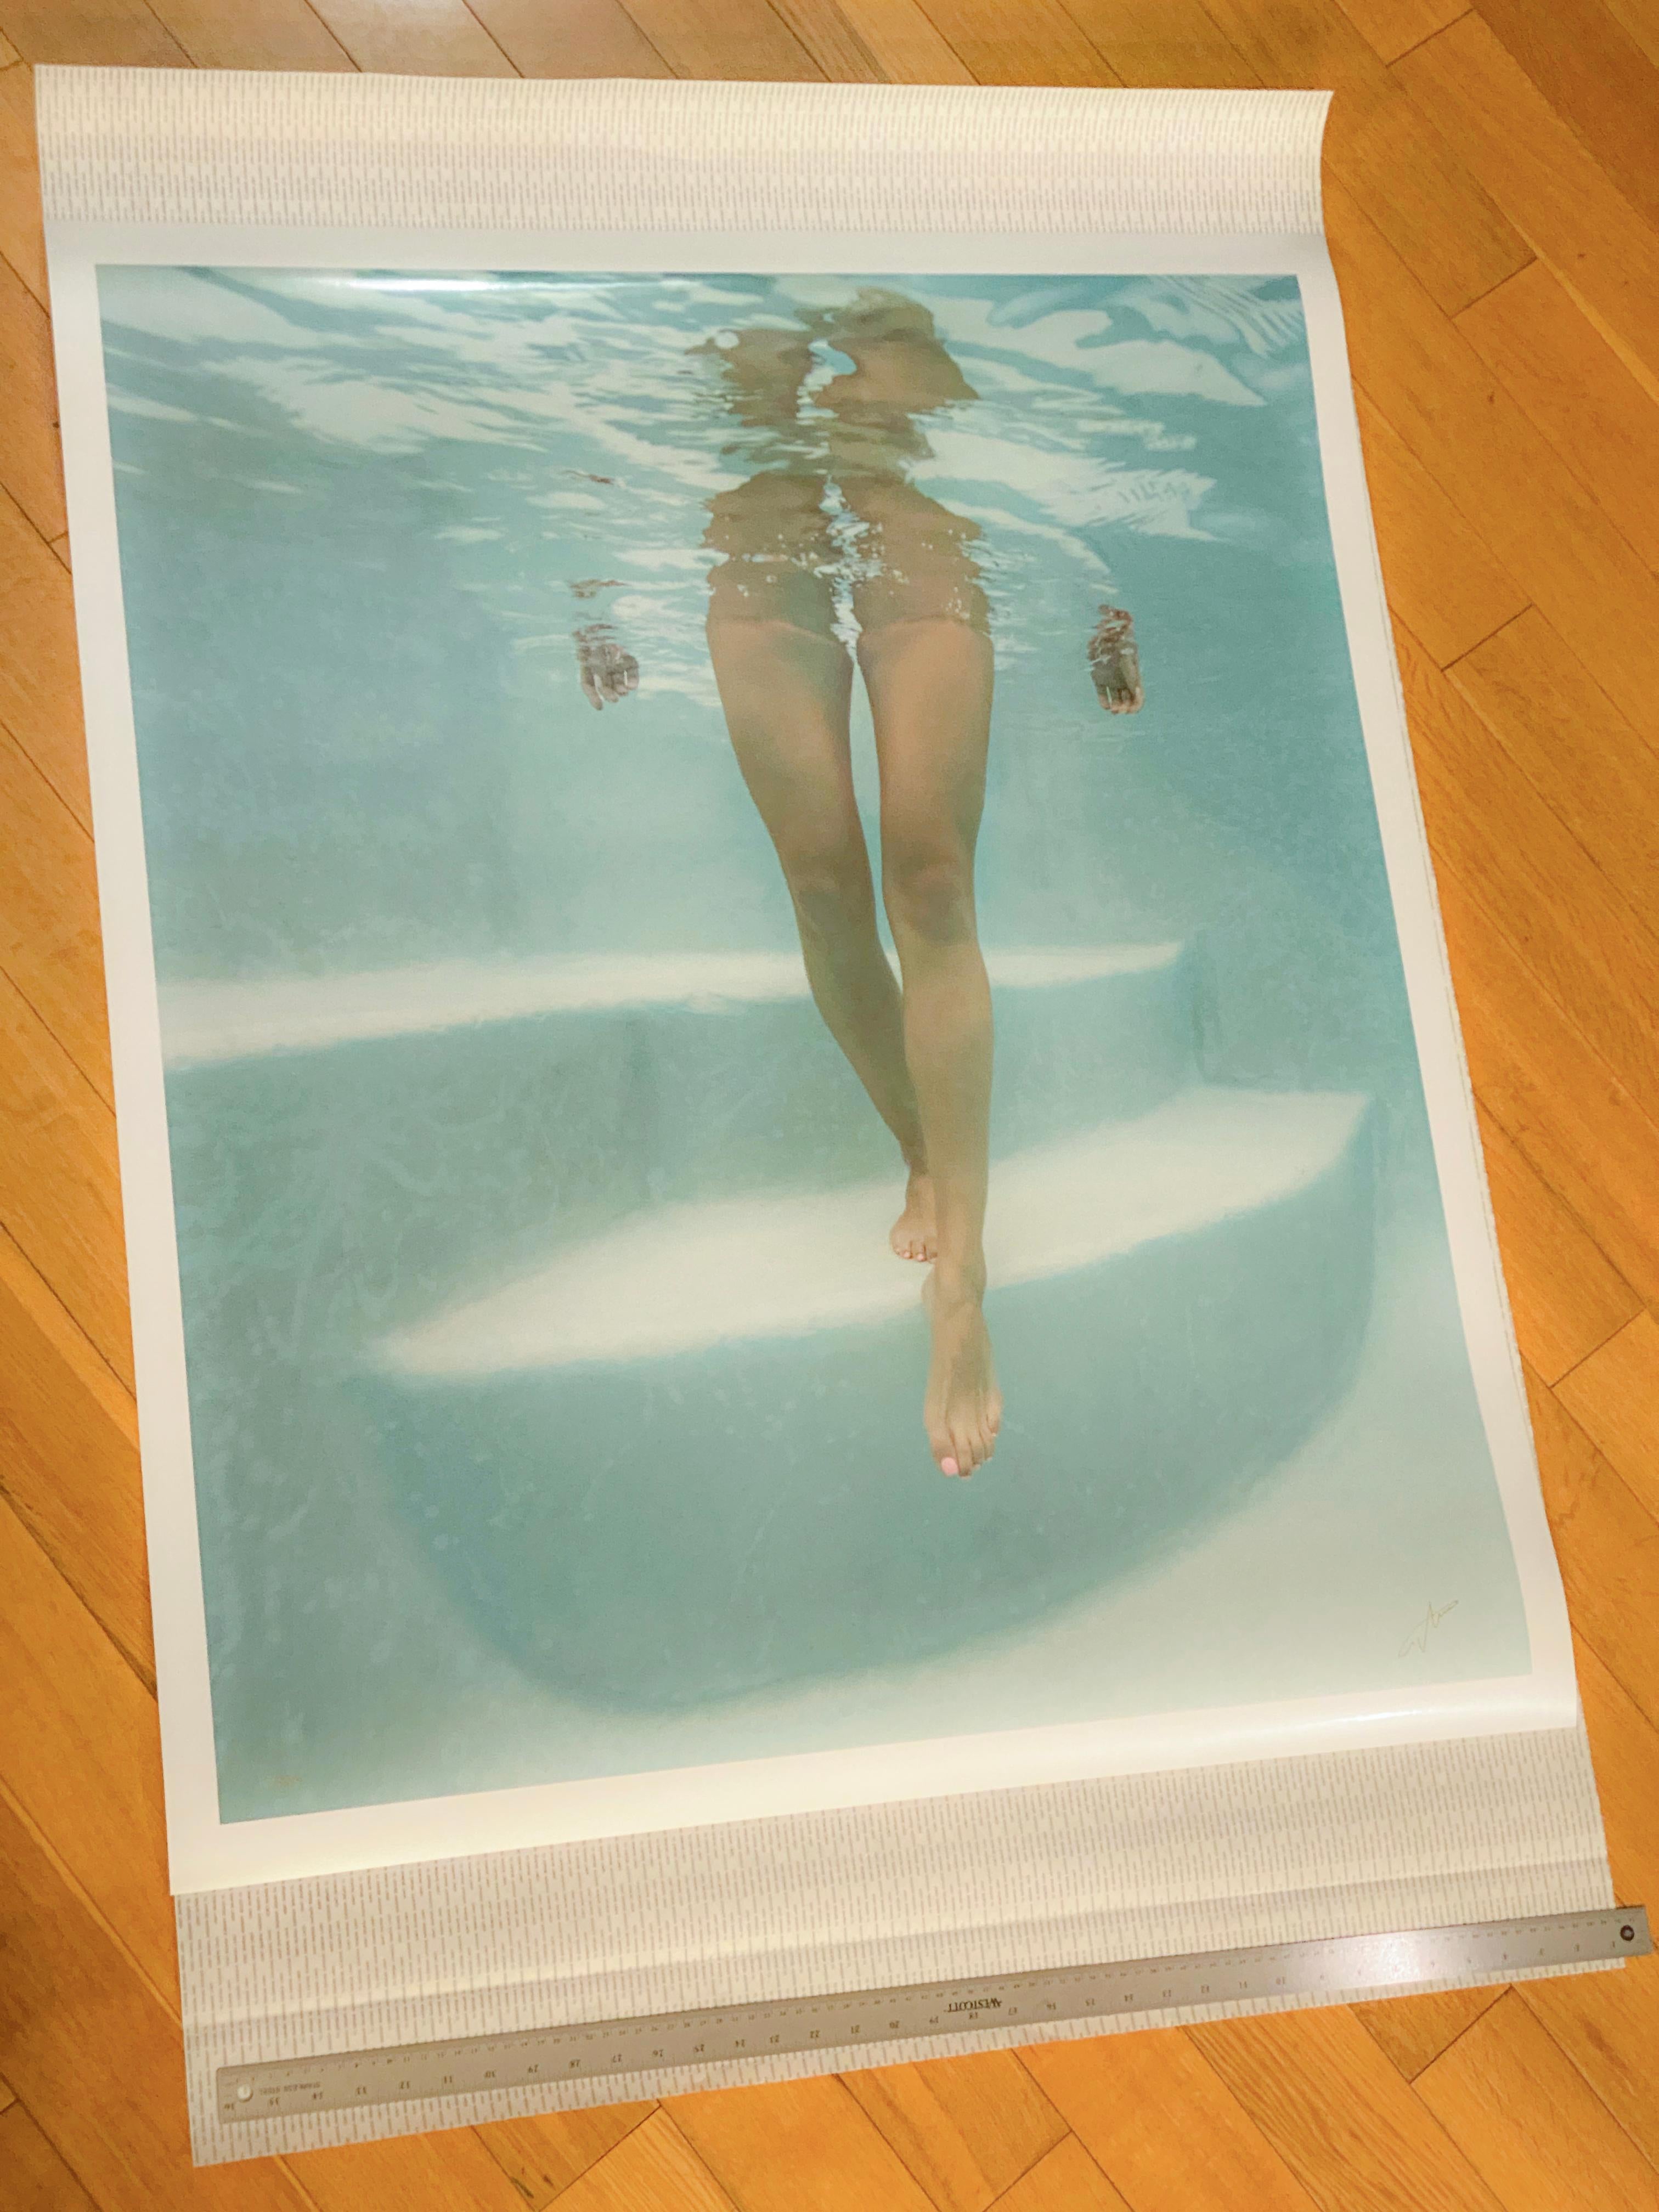 Steps  - underwater photograph - print on paper - Photograph by Alex Sher